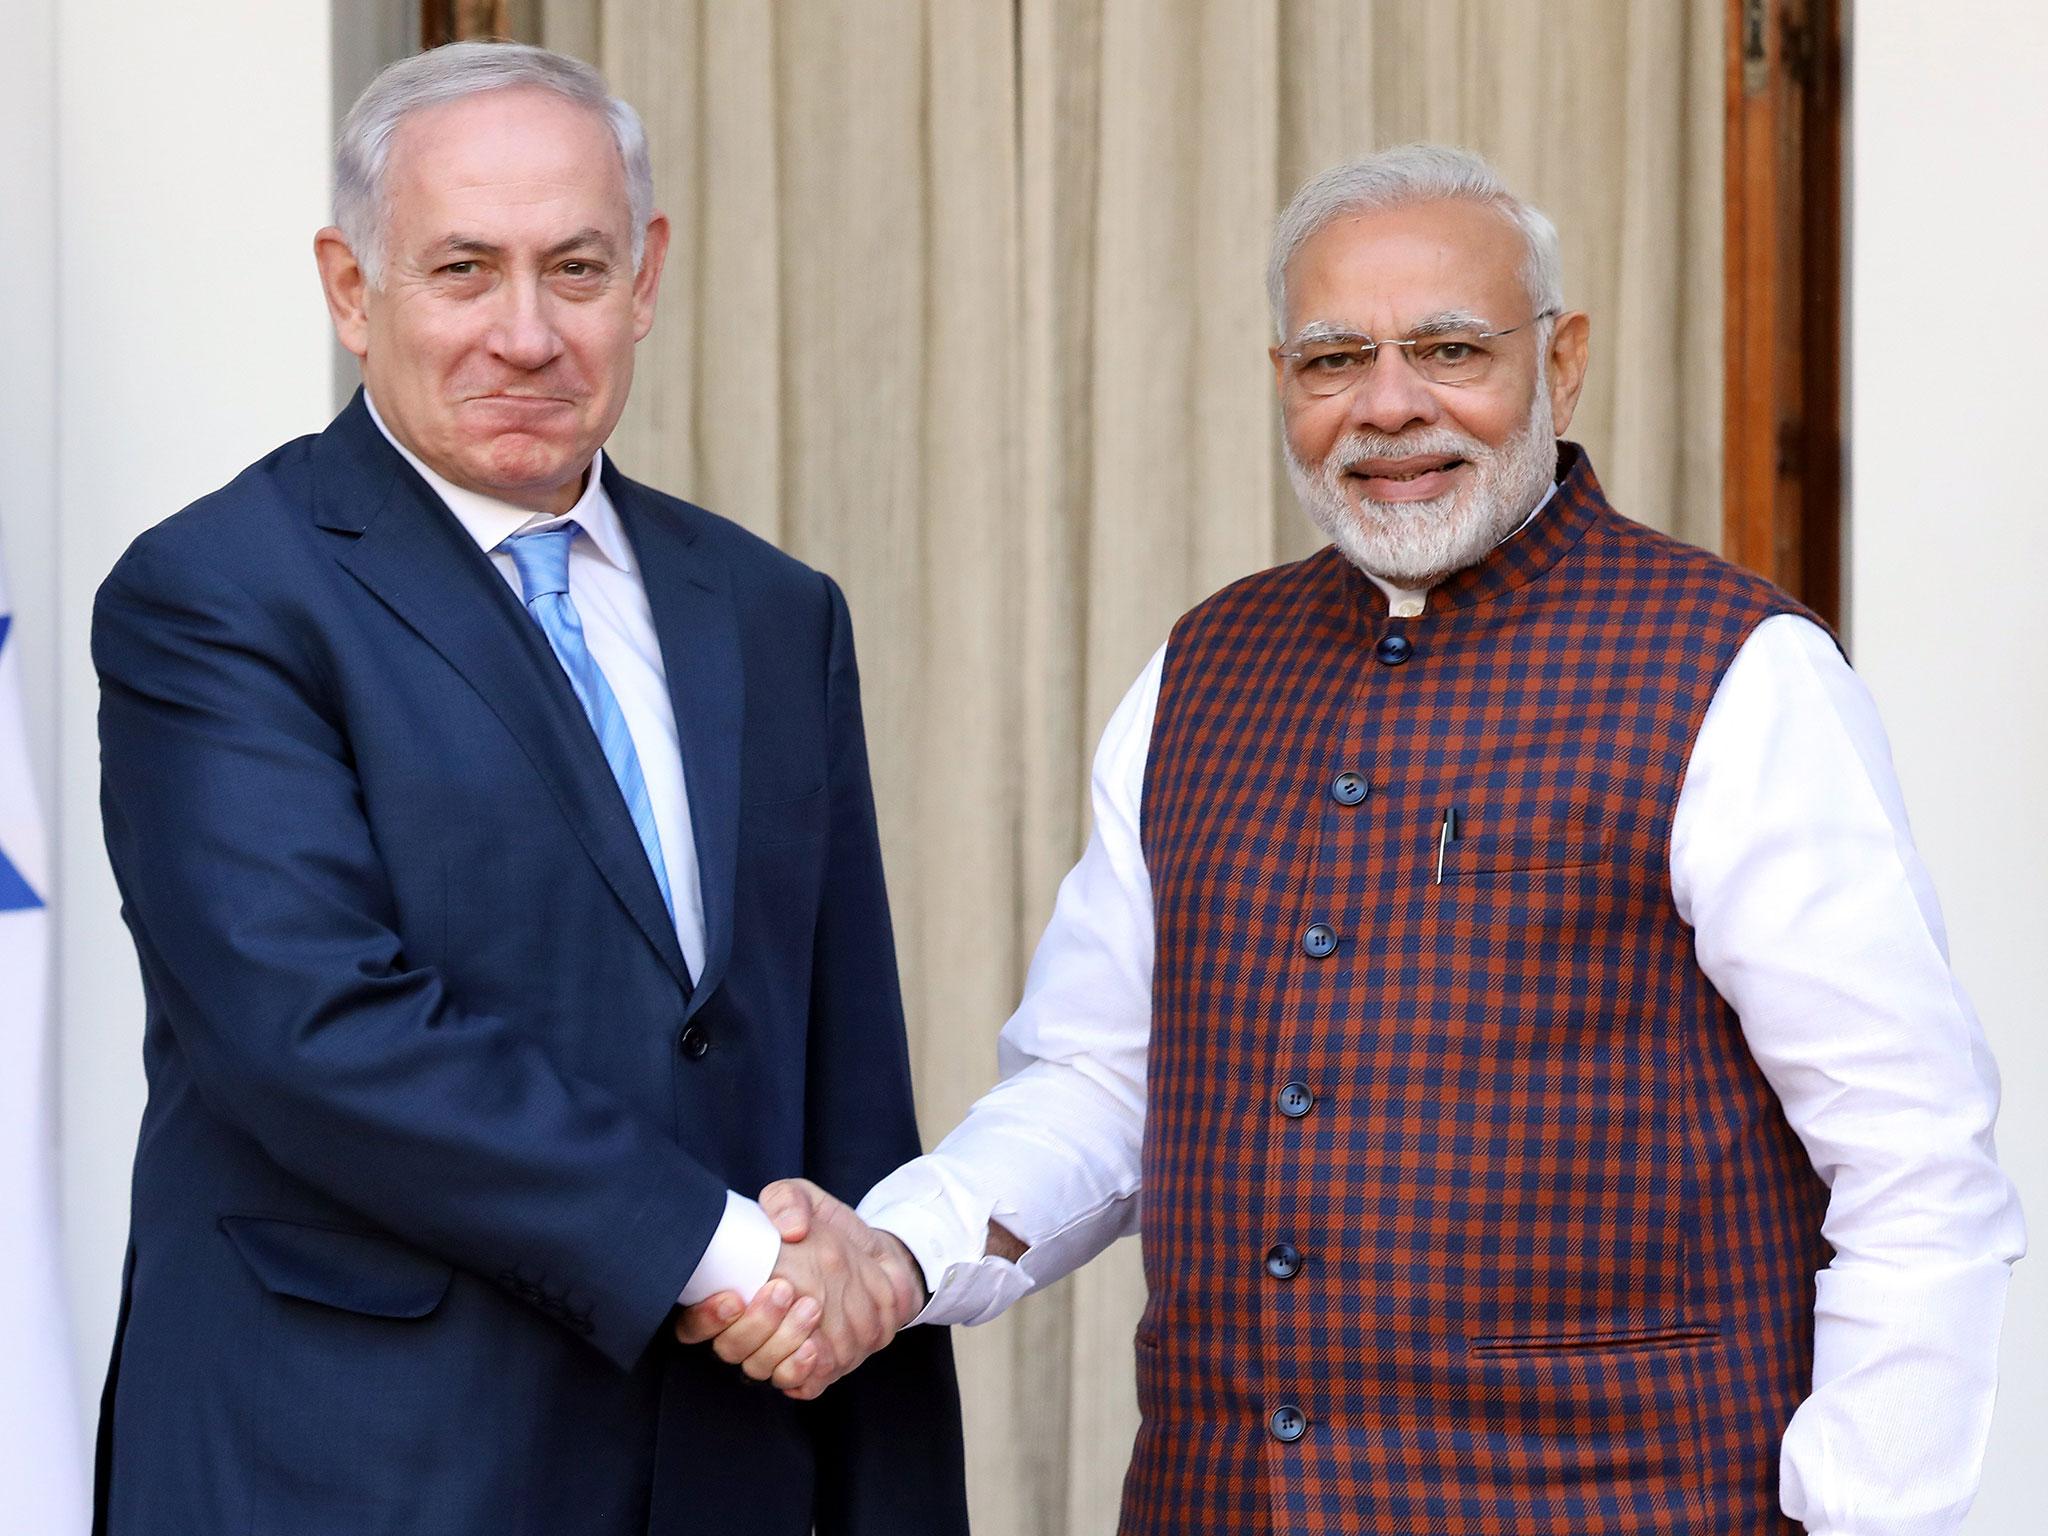 Benjamin Netanyahu was welcomed by Narendra Modi in Hebrew as he arrived in India for a six-day visit